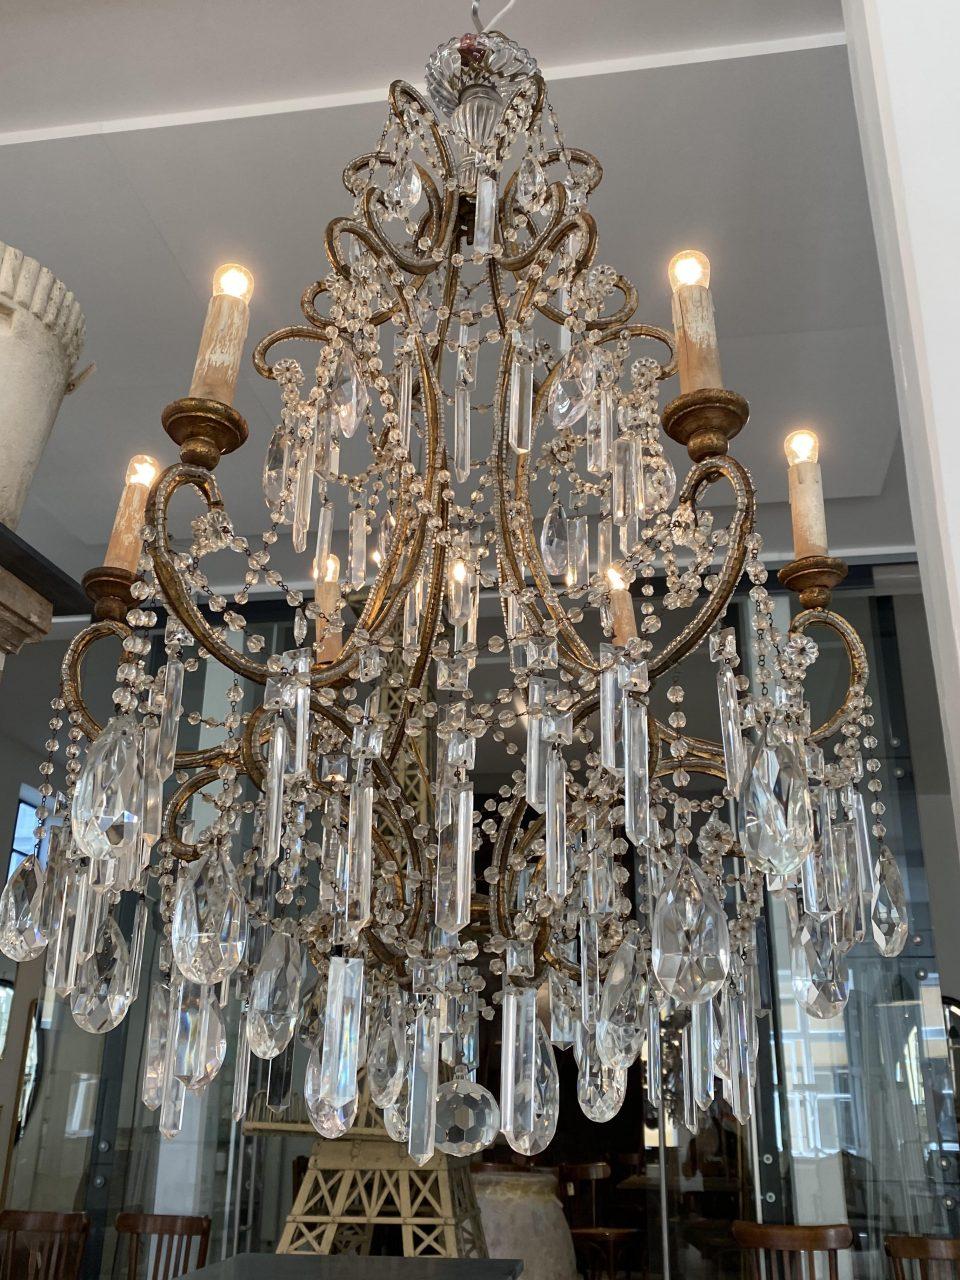 Elegant, imaginative and beautiful antique prism chandelier, circa 1900. Of the like one would see at French chateaus and mansions. Truly opulant clear rows of prisms wonderfully faceted ones, in different sizes that elegantly capture and reflect